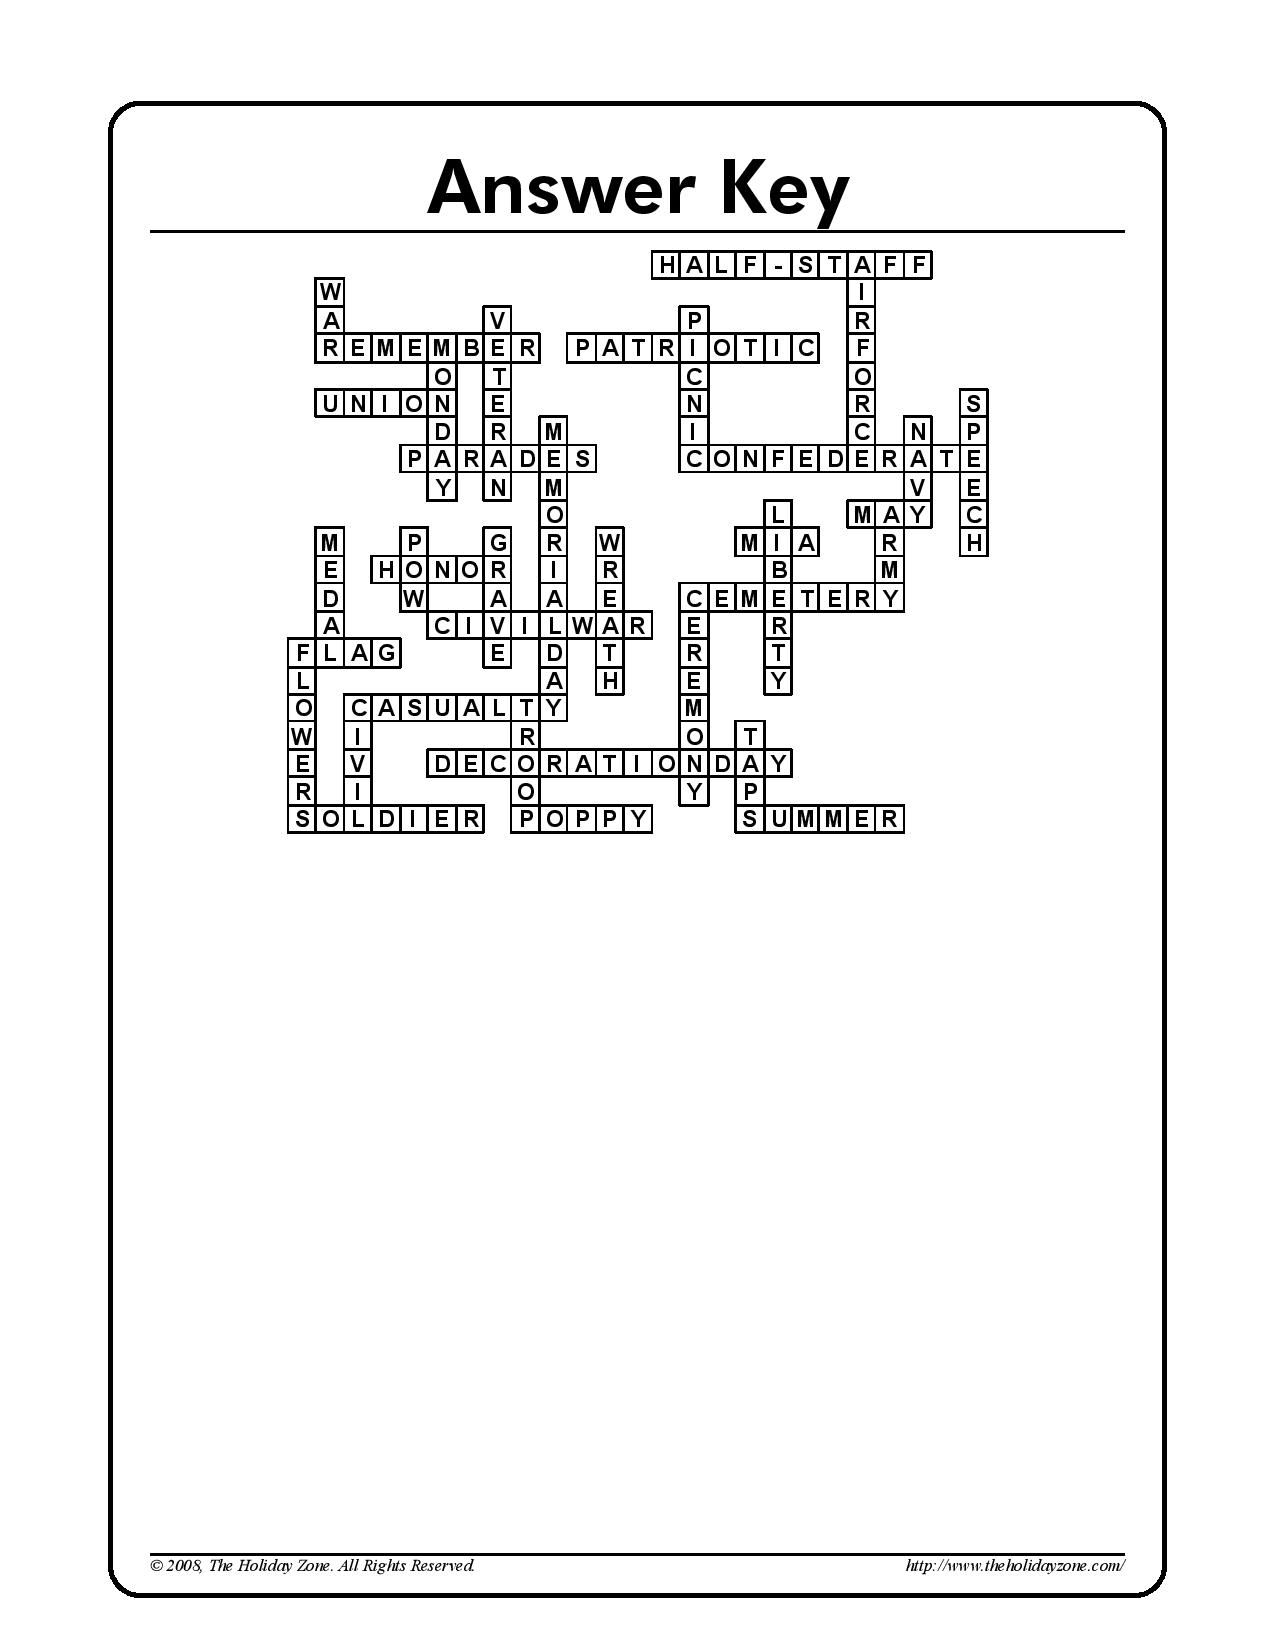 Memorial Day Crossword Puzzle Answer Sheet | Holiday Classroom - Memorial Day Crossword Puzzle Printable